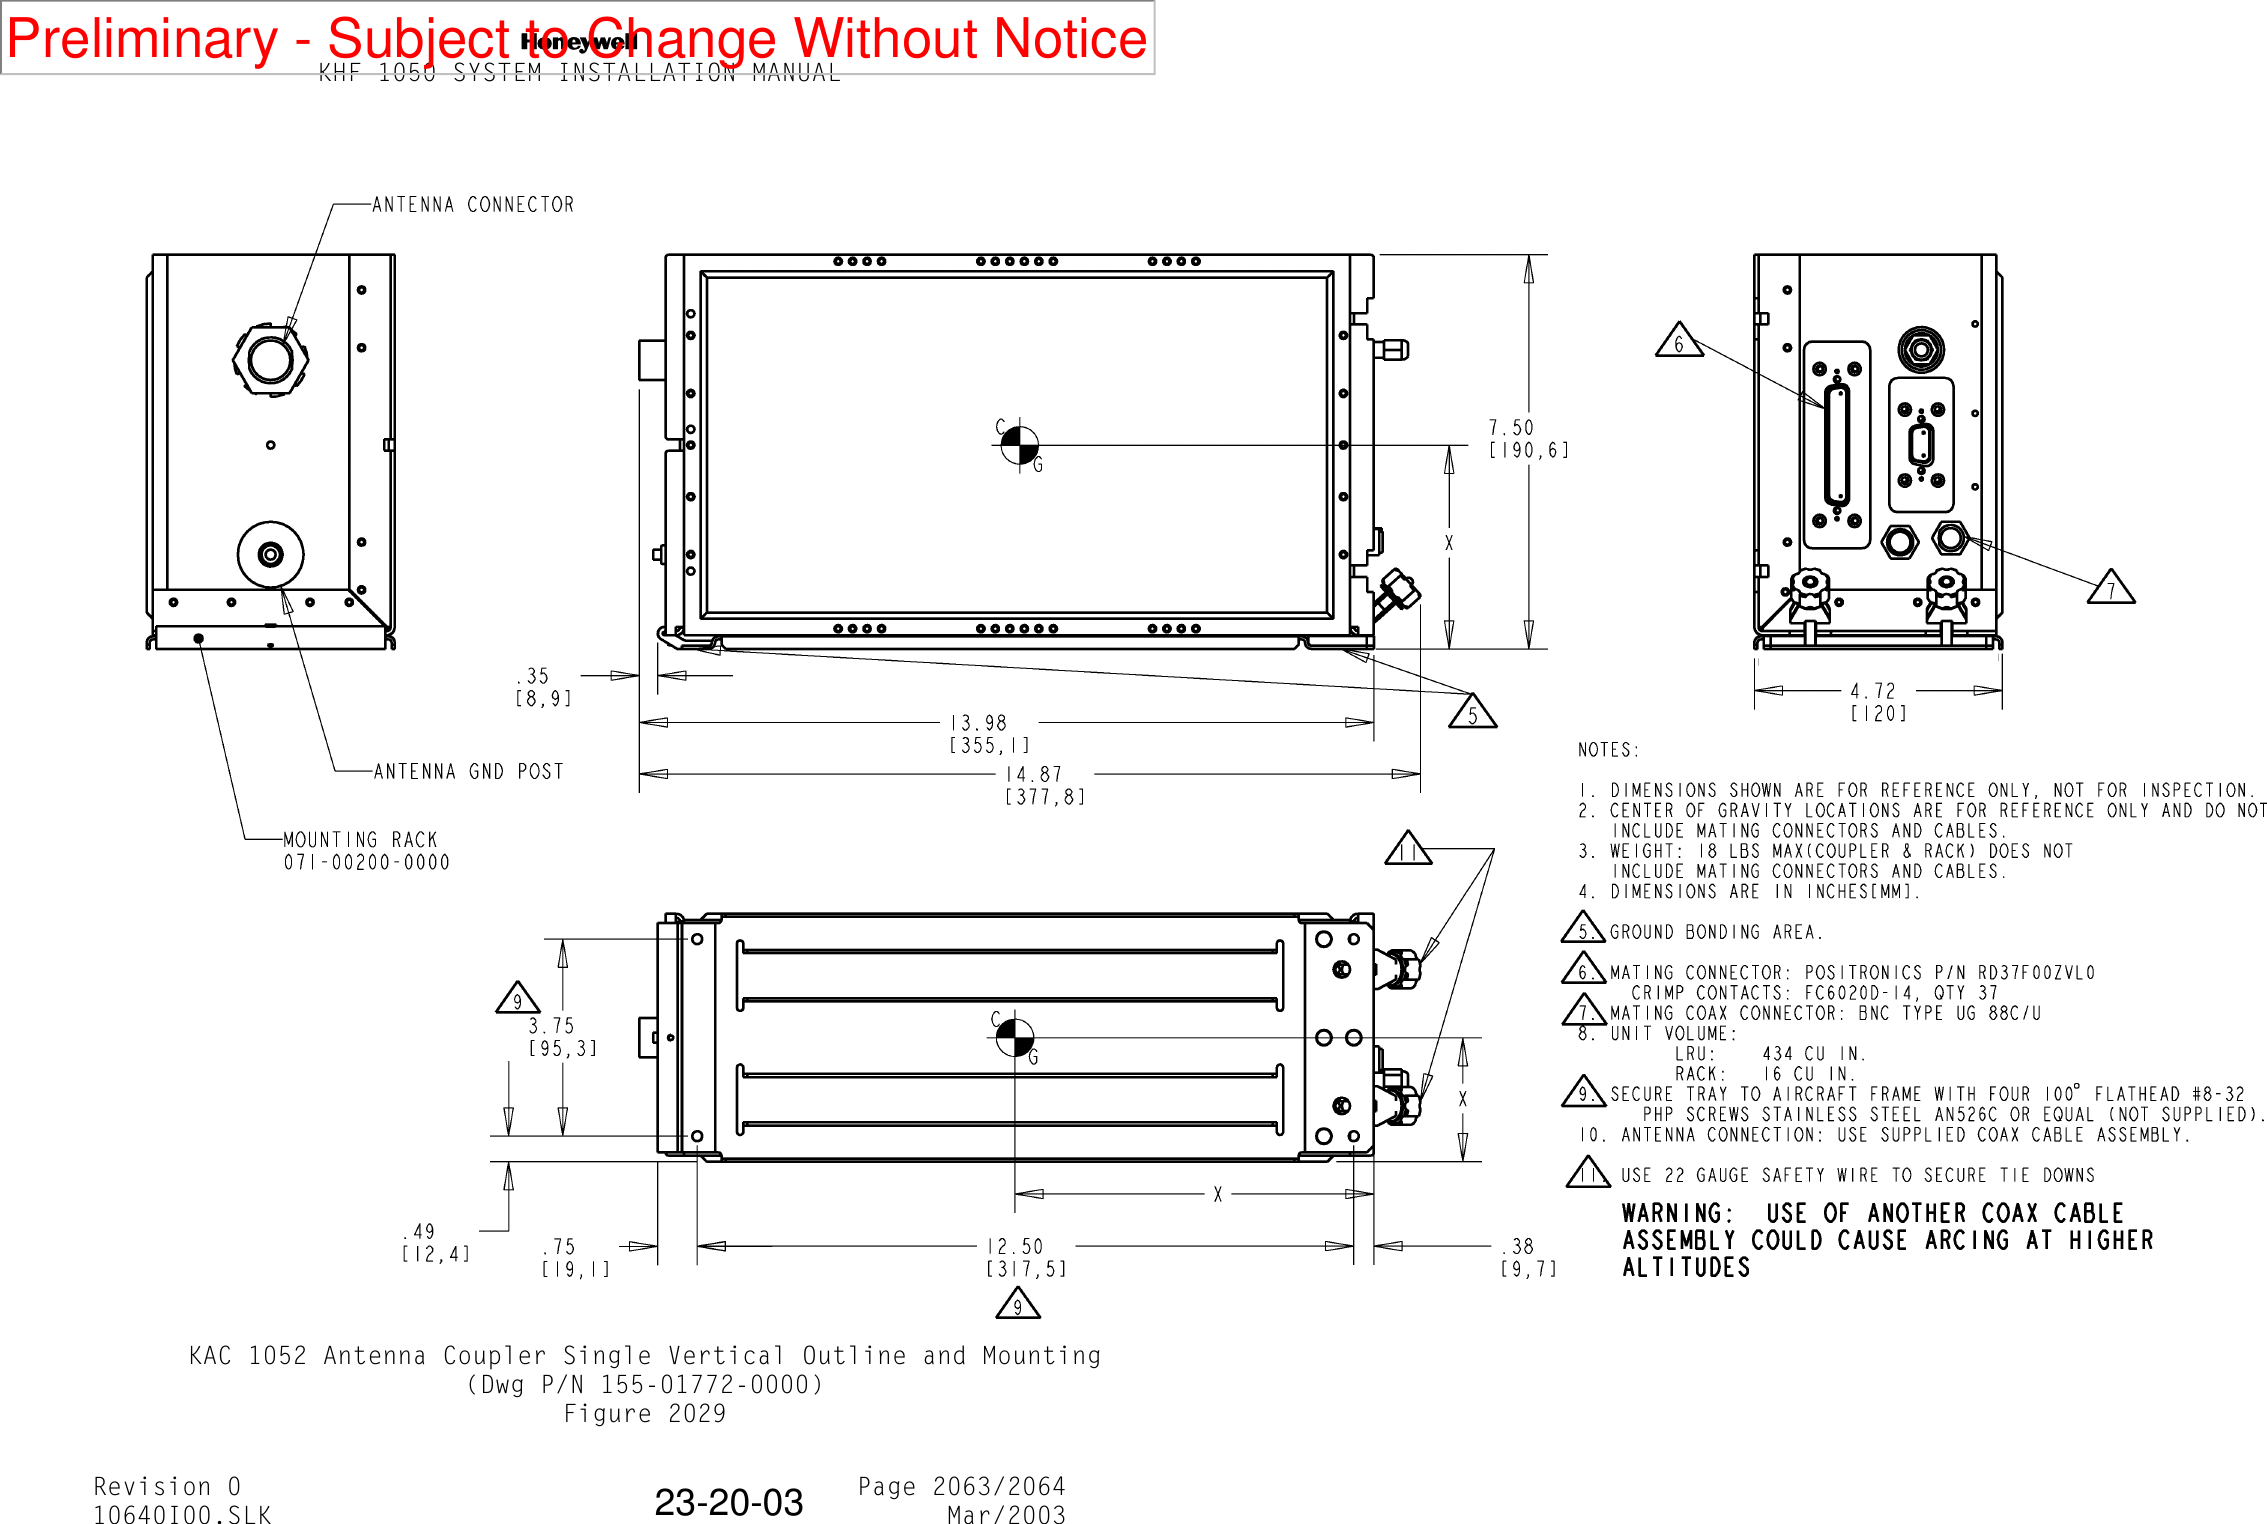 NKHF 1050 SYSTEM INSTALLATION MANUALRevision 0 Page 2063/206410640I00.SLK Mar/200323-20-03KAC 1052 Antenna Coupler Single Vertical Outline and Mounting(Dwg P/N 155-01772-0000)Figure 2029Preliminary - Subject to Change Without Notice